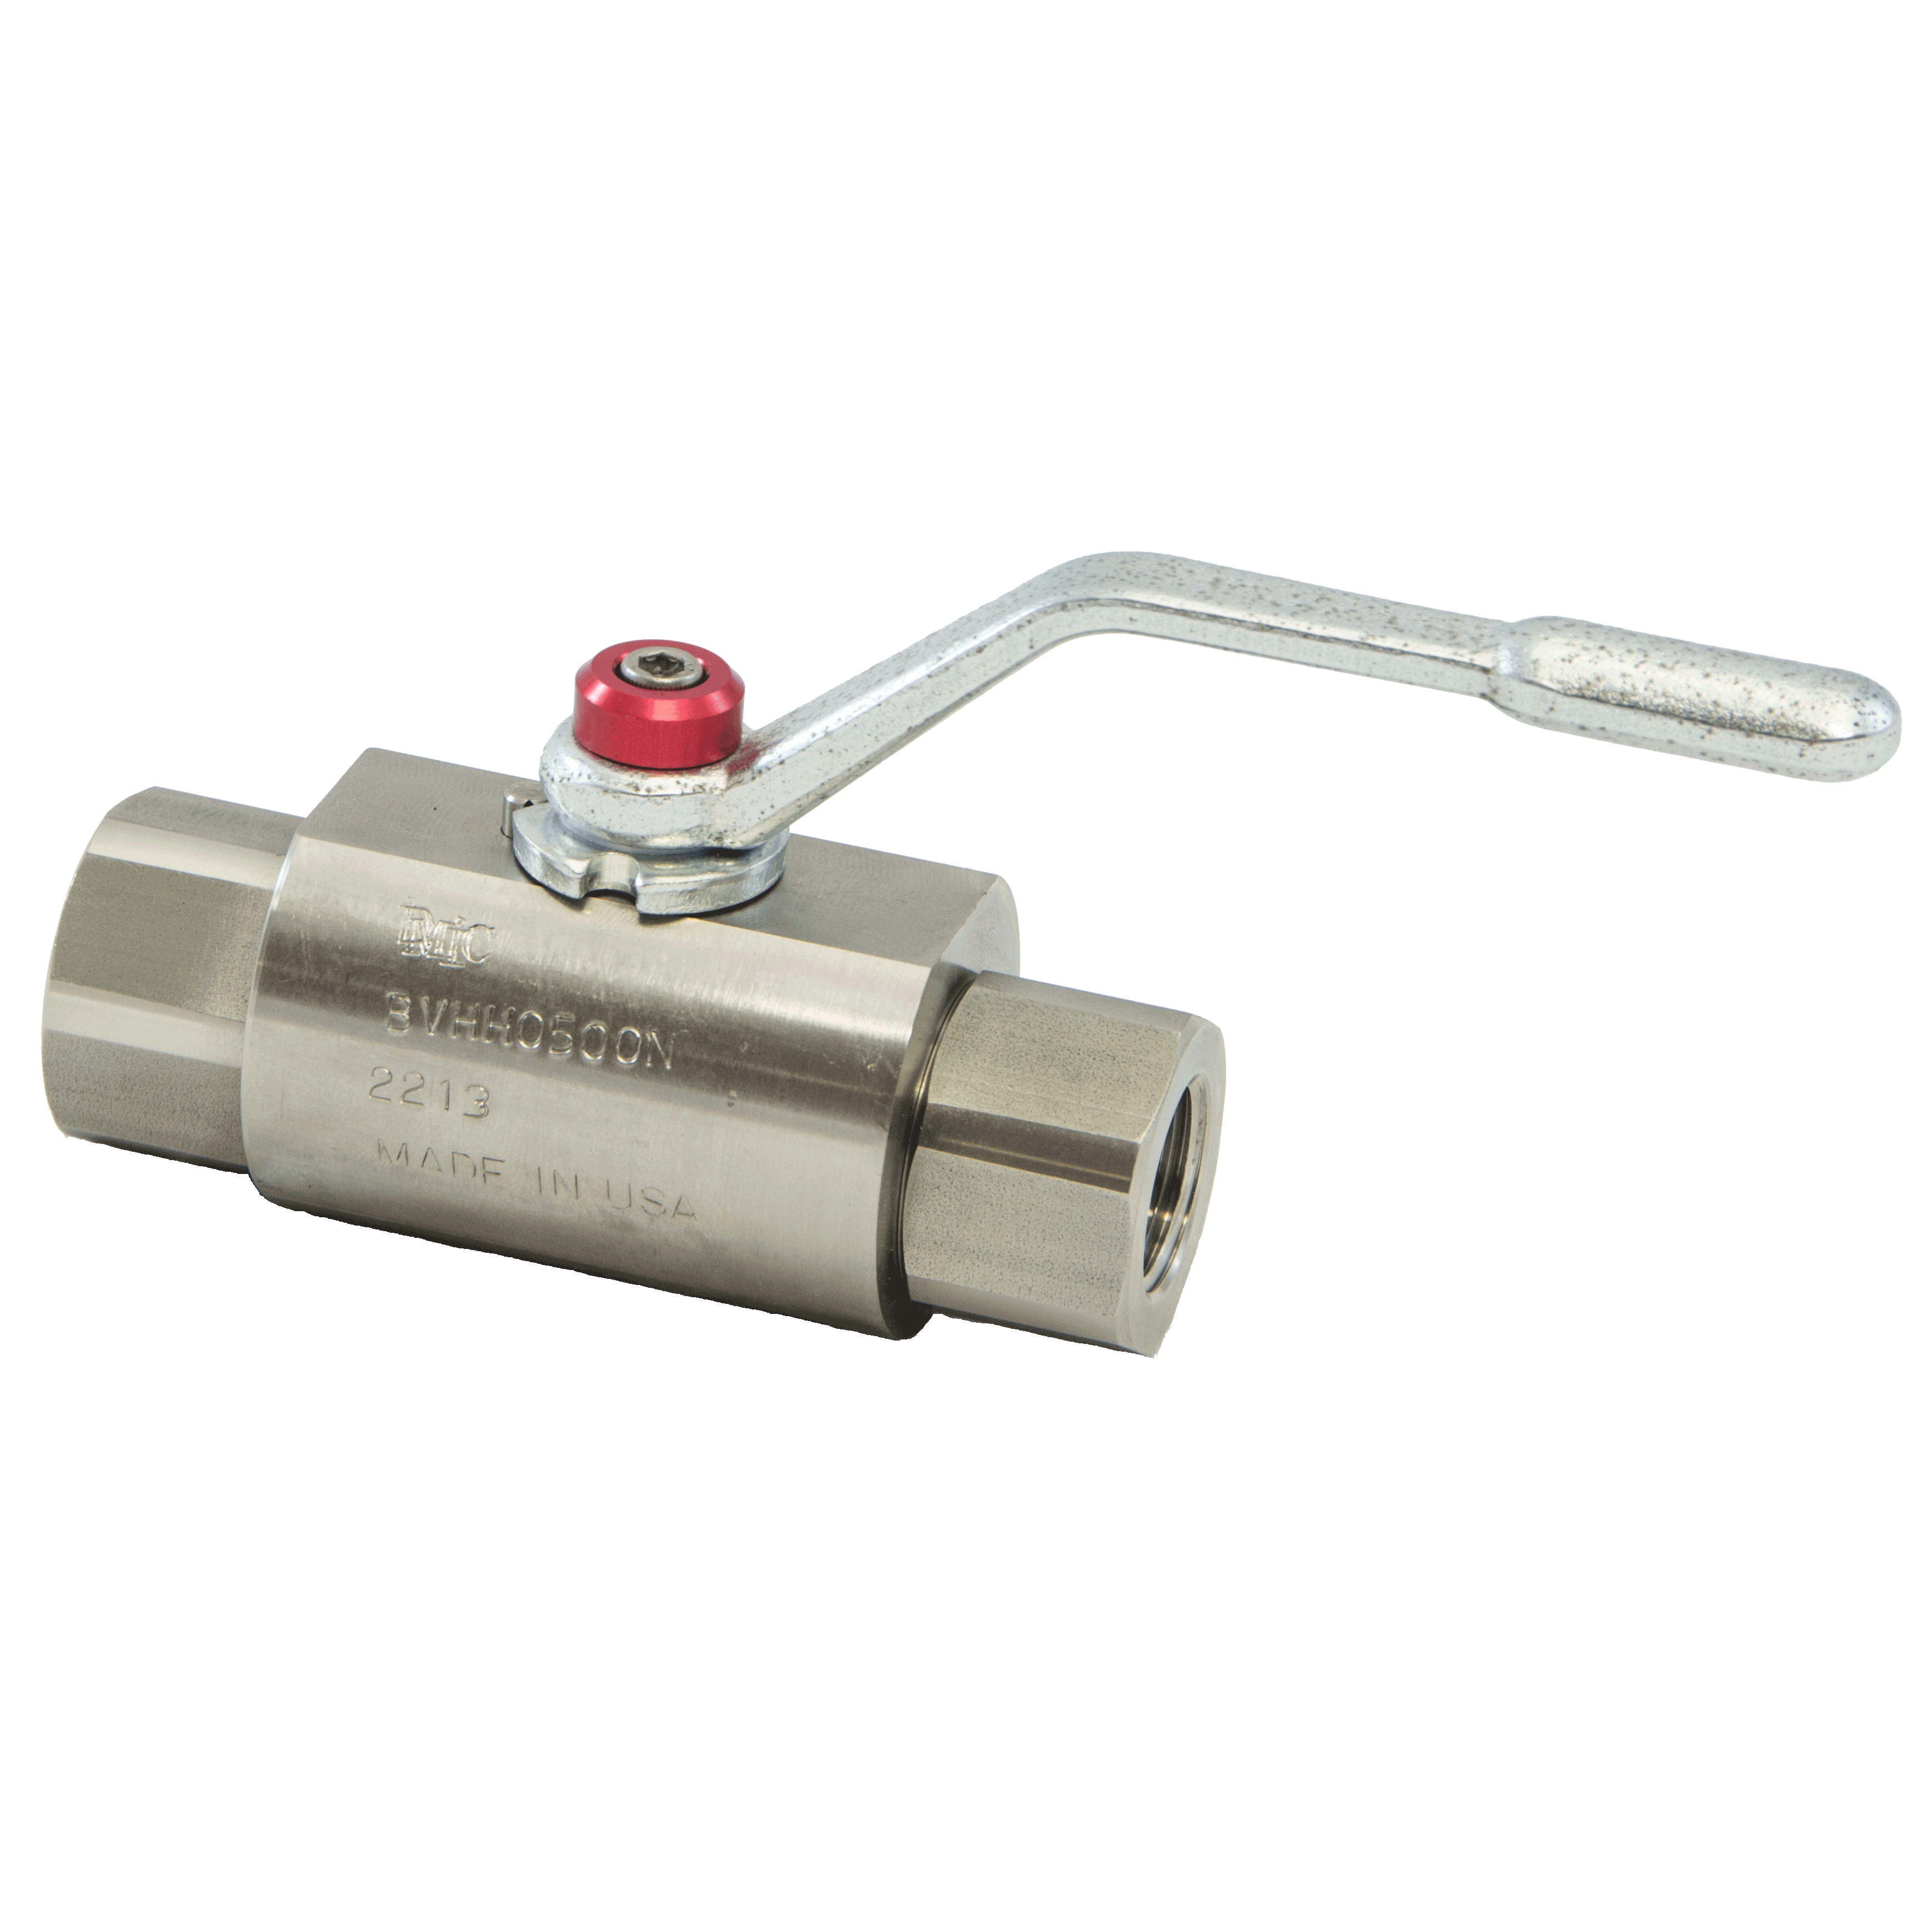 BVHH-1500S-2211 : DMIC Super High Pressure Ball Valve, #24 SAE (1.5), 316 Stainless Steel, 10000psi, Two-Way